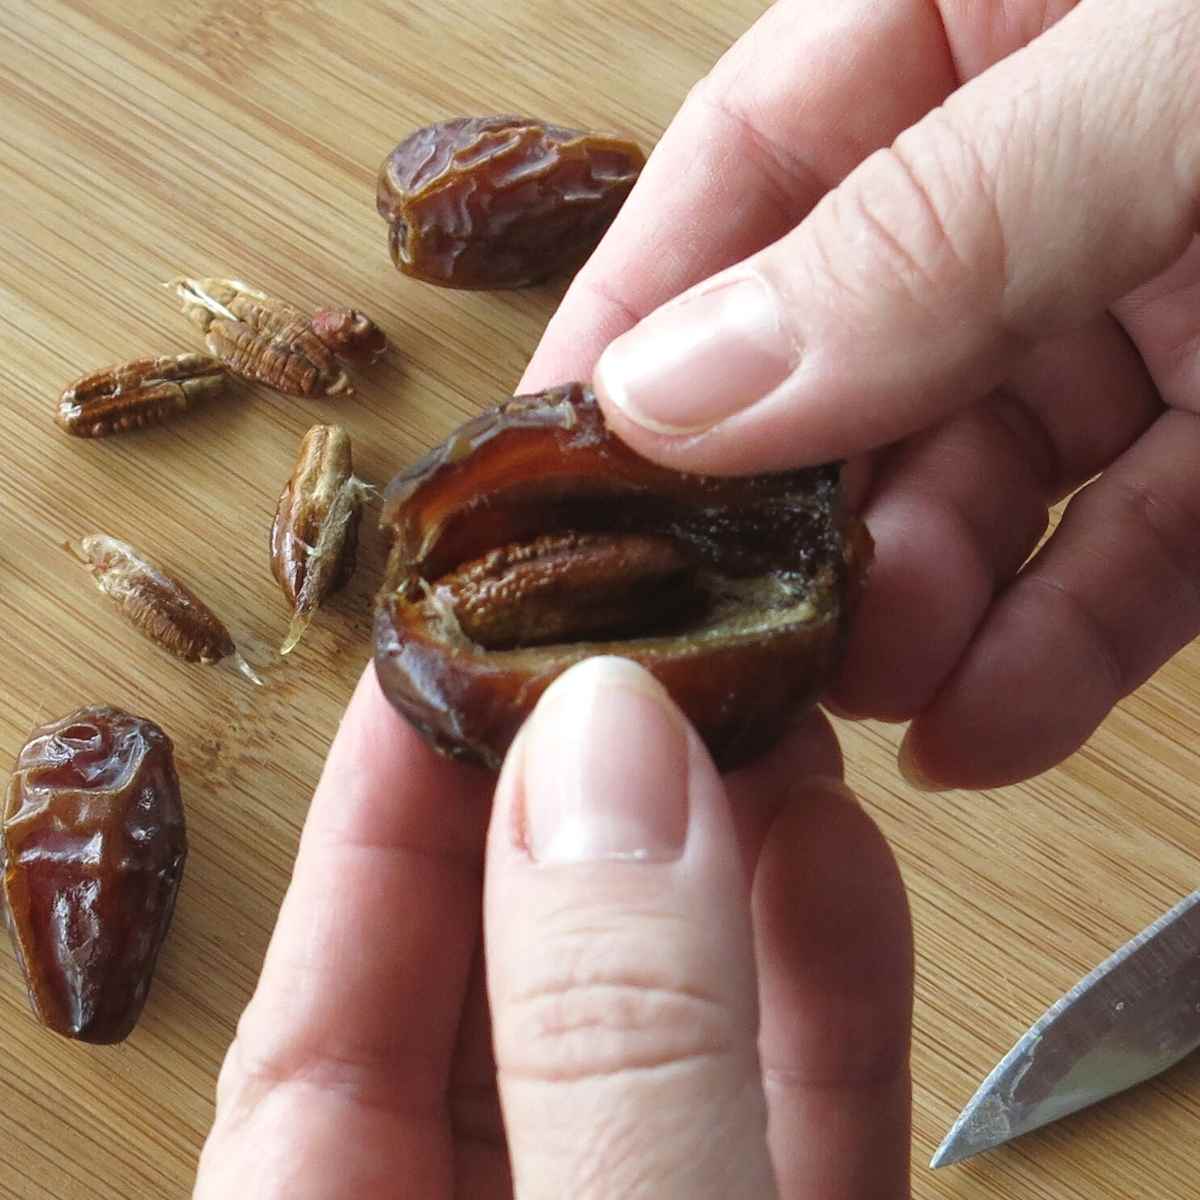 Fingers pulling open a Medjool date to expose the pit.